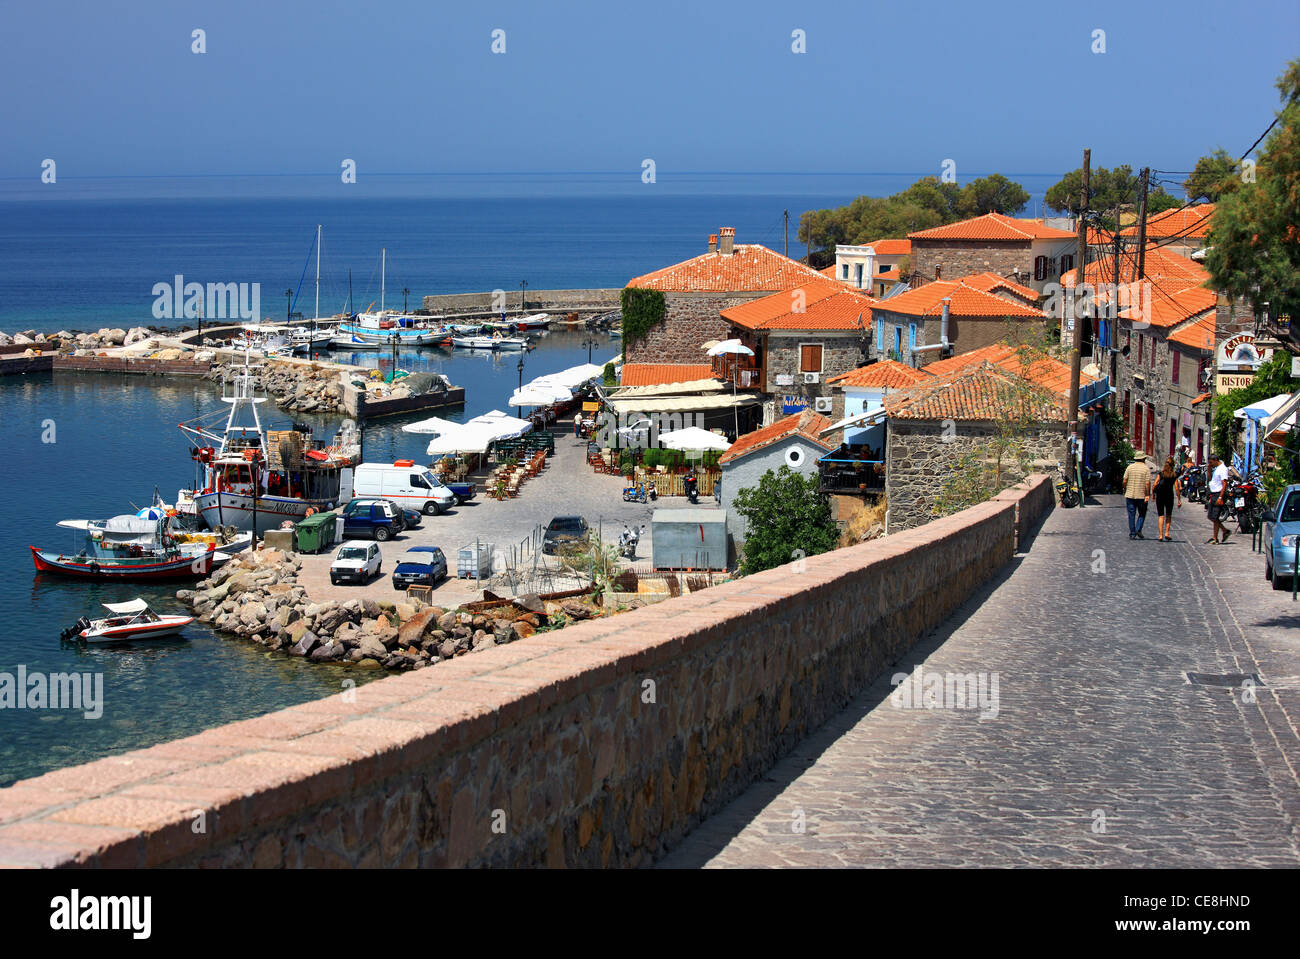 The road that leads to the picturesque little harbor of Molyvos town, Lesvos island, Northern Aegean, Greece. Stock Photo